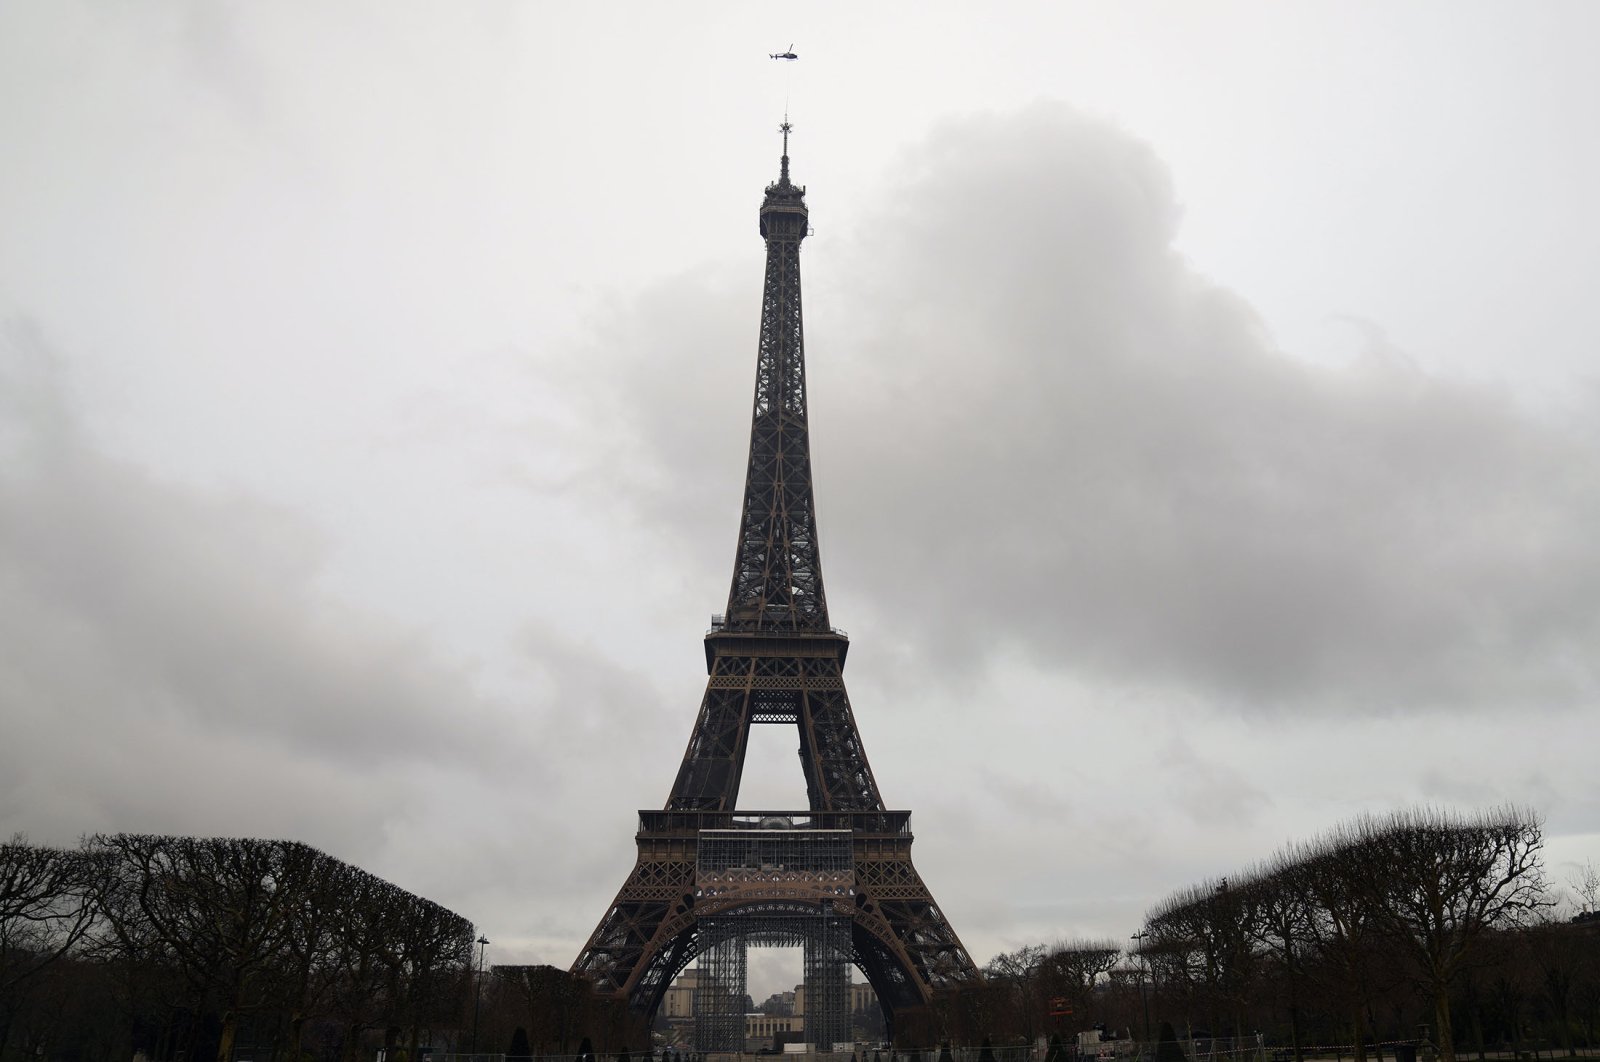 A Eurocopter Ecureuil 2 helicopter installs a new telecom transmission TDF (TeleDiffusion de France) antenna on the top of the Eiffel Tower in Paris, France, March 15, 2022. (AP Photo)